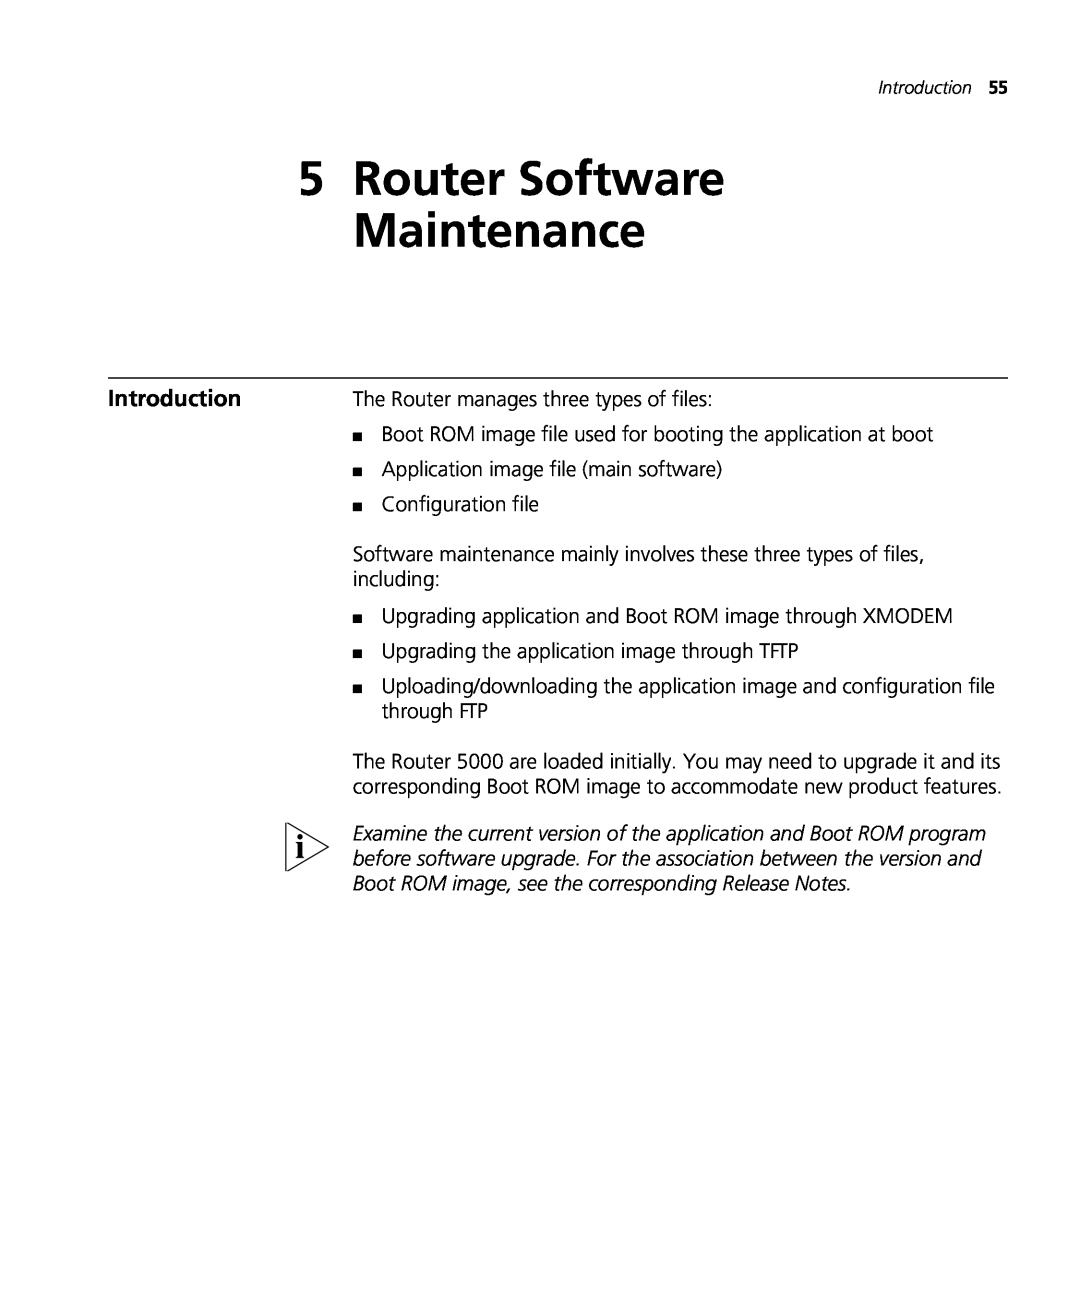 3Com 5000 manual Router Software Maintenance, Introduction 